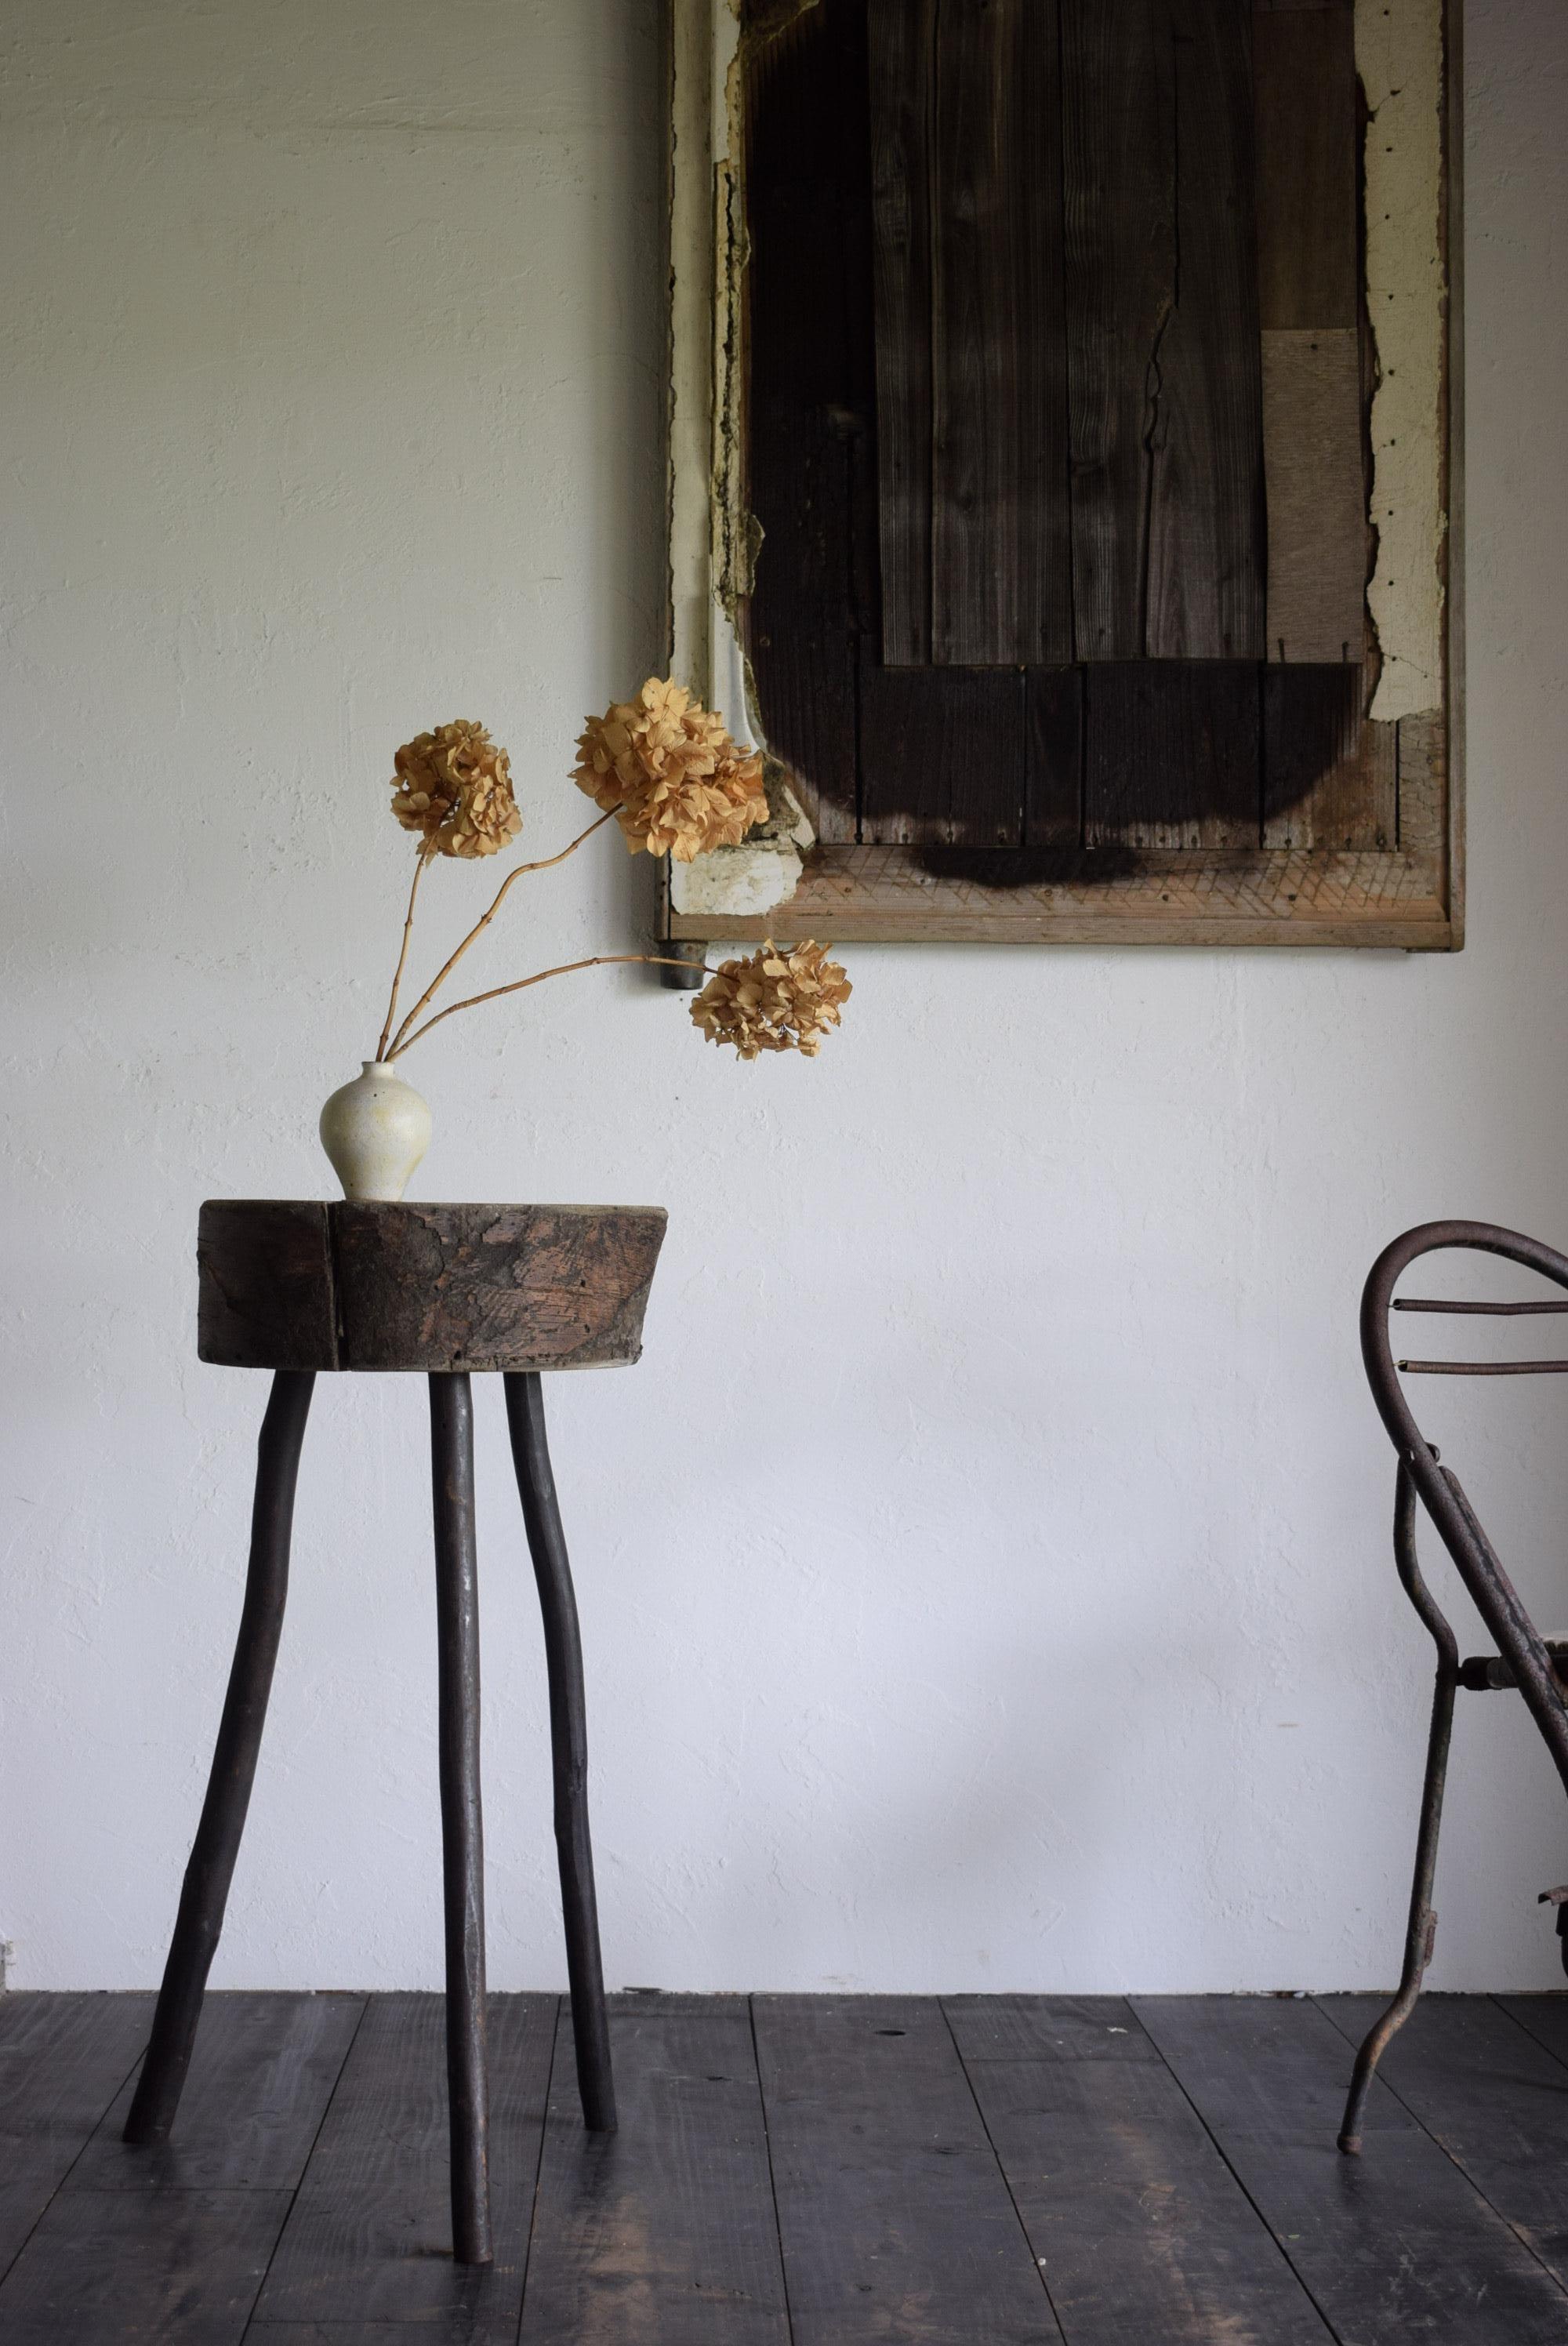 This flower stand was made from a stump that was once used as a workbench, with three branches as legs. Its appearance is very Japanese, and it is a stand that exudes the wabi-sabi aesthetic. The delicate, slender legs and the simplicity of the